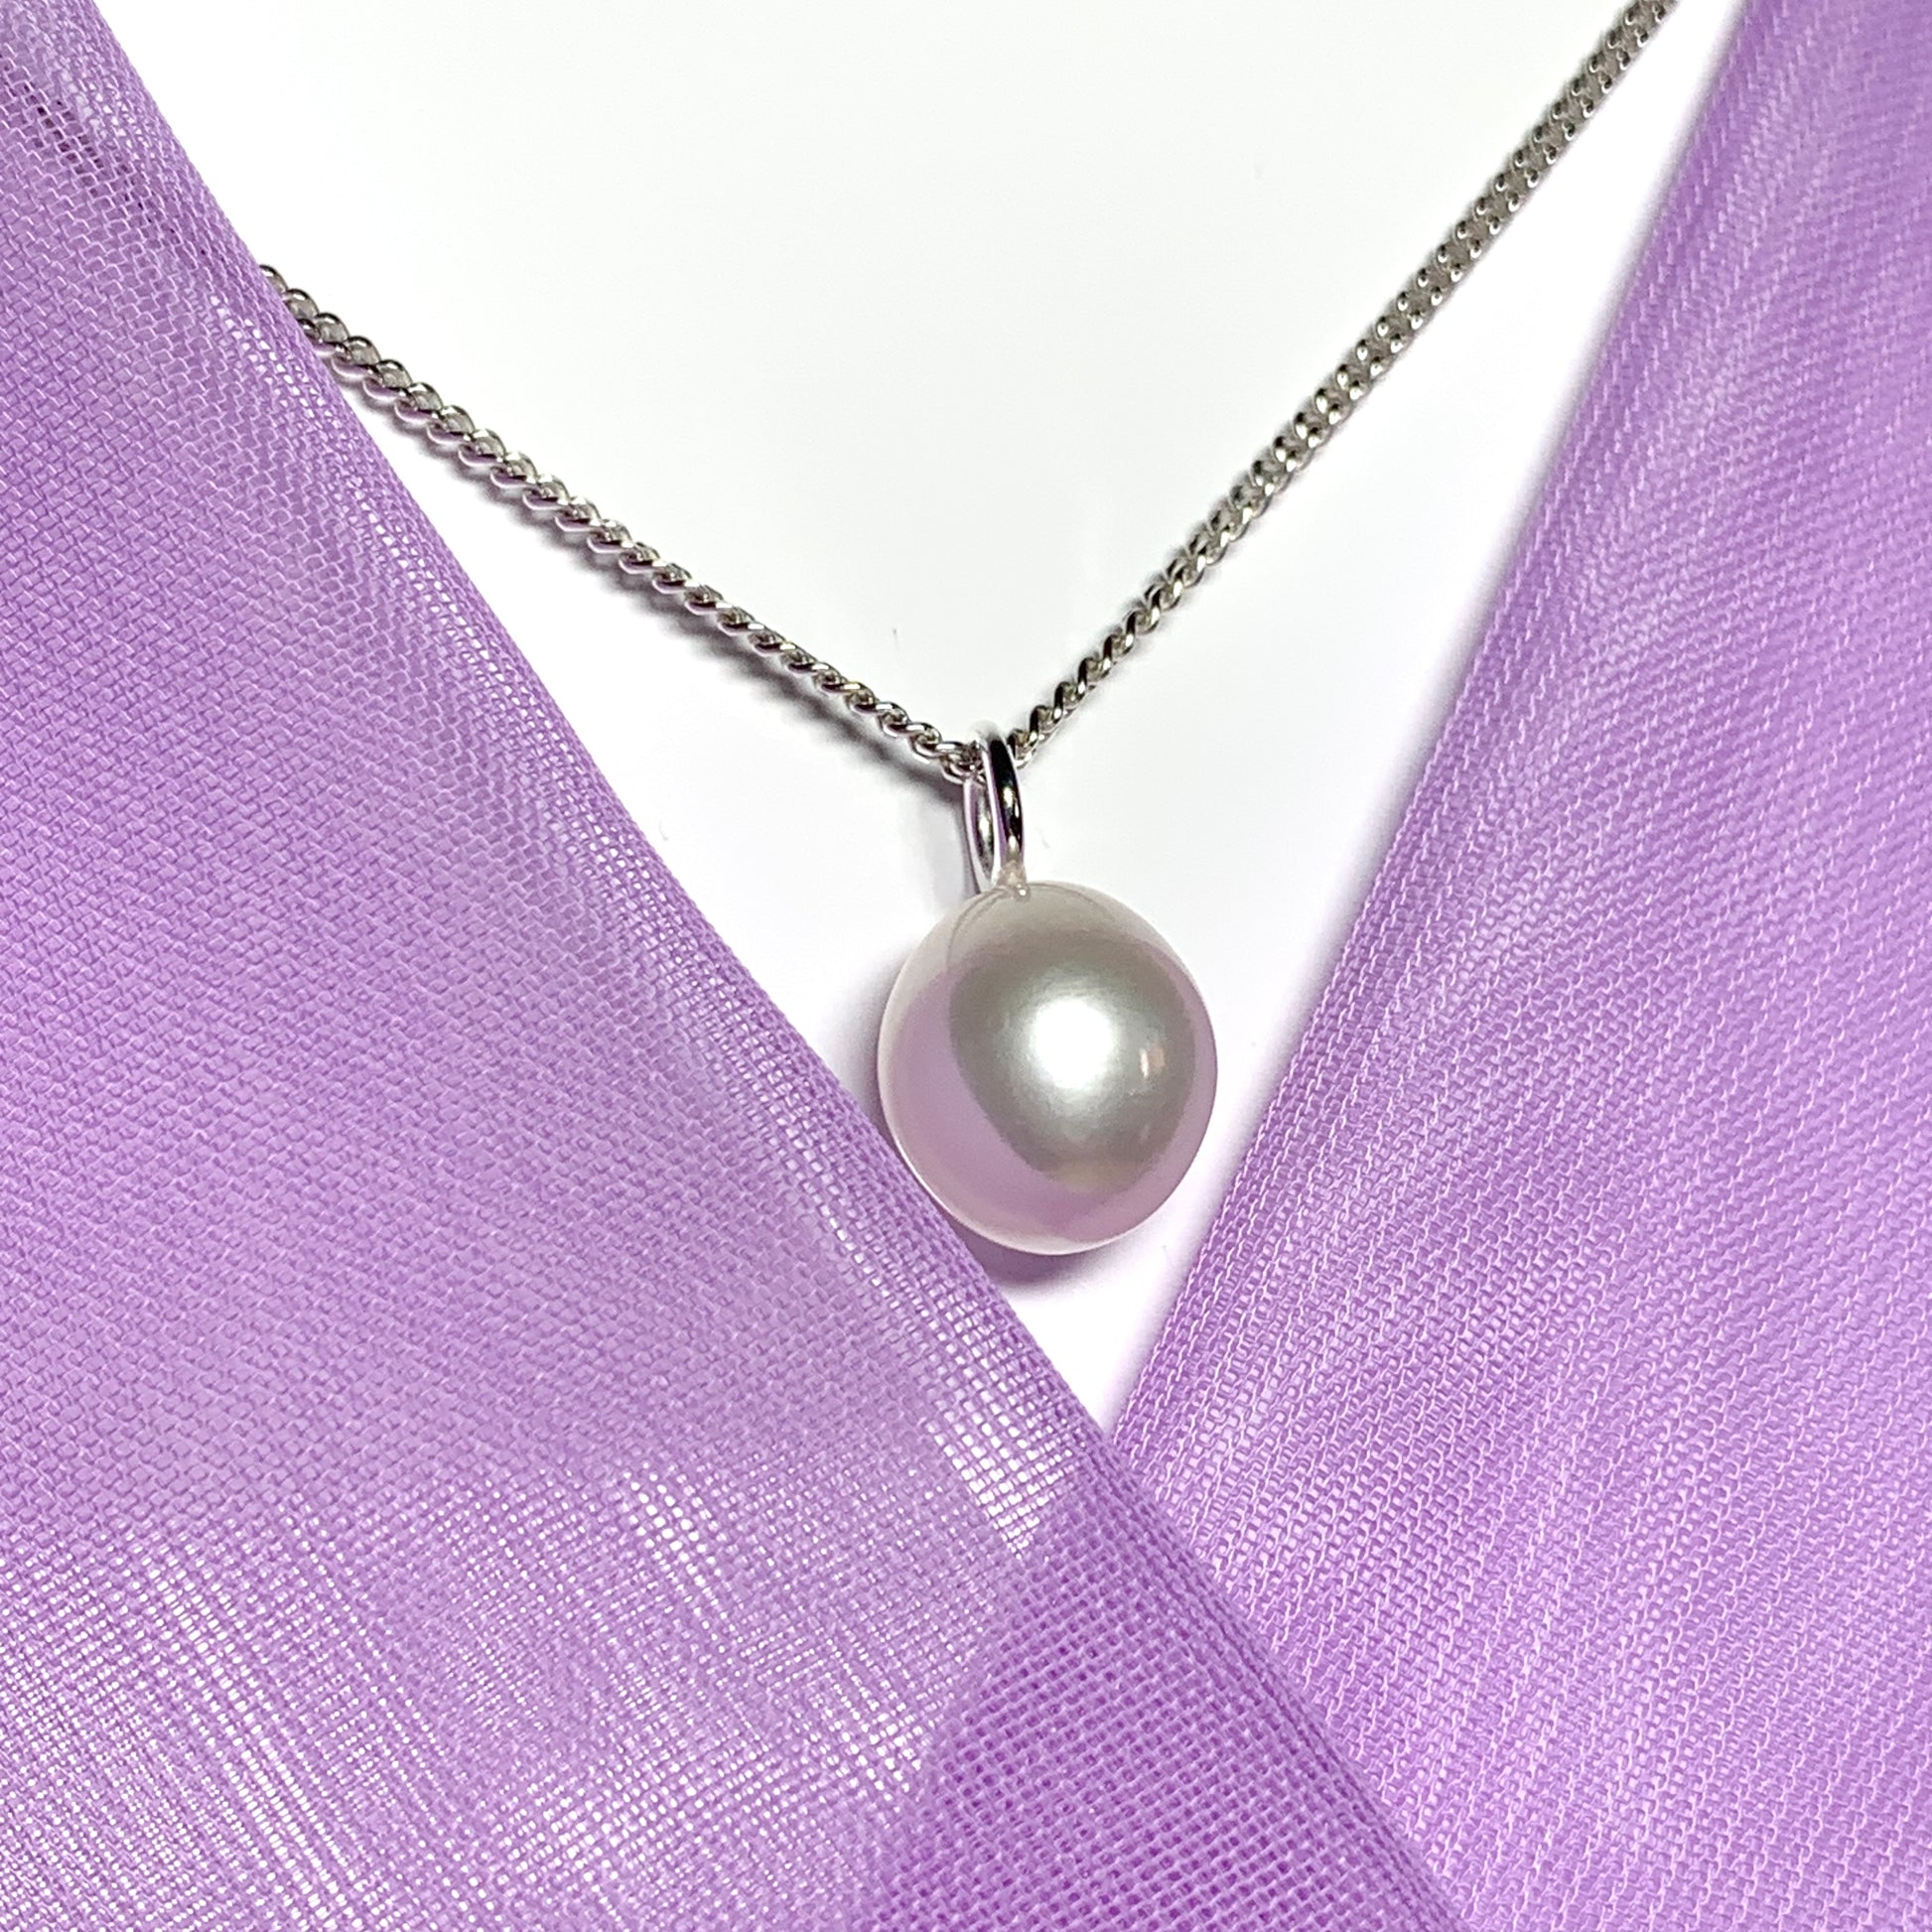 Real freshwater pearl necklace pendant